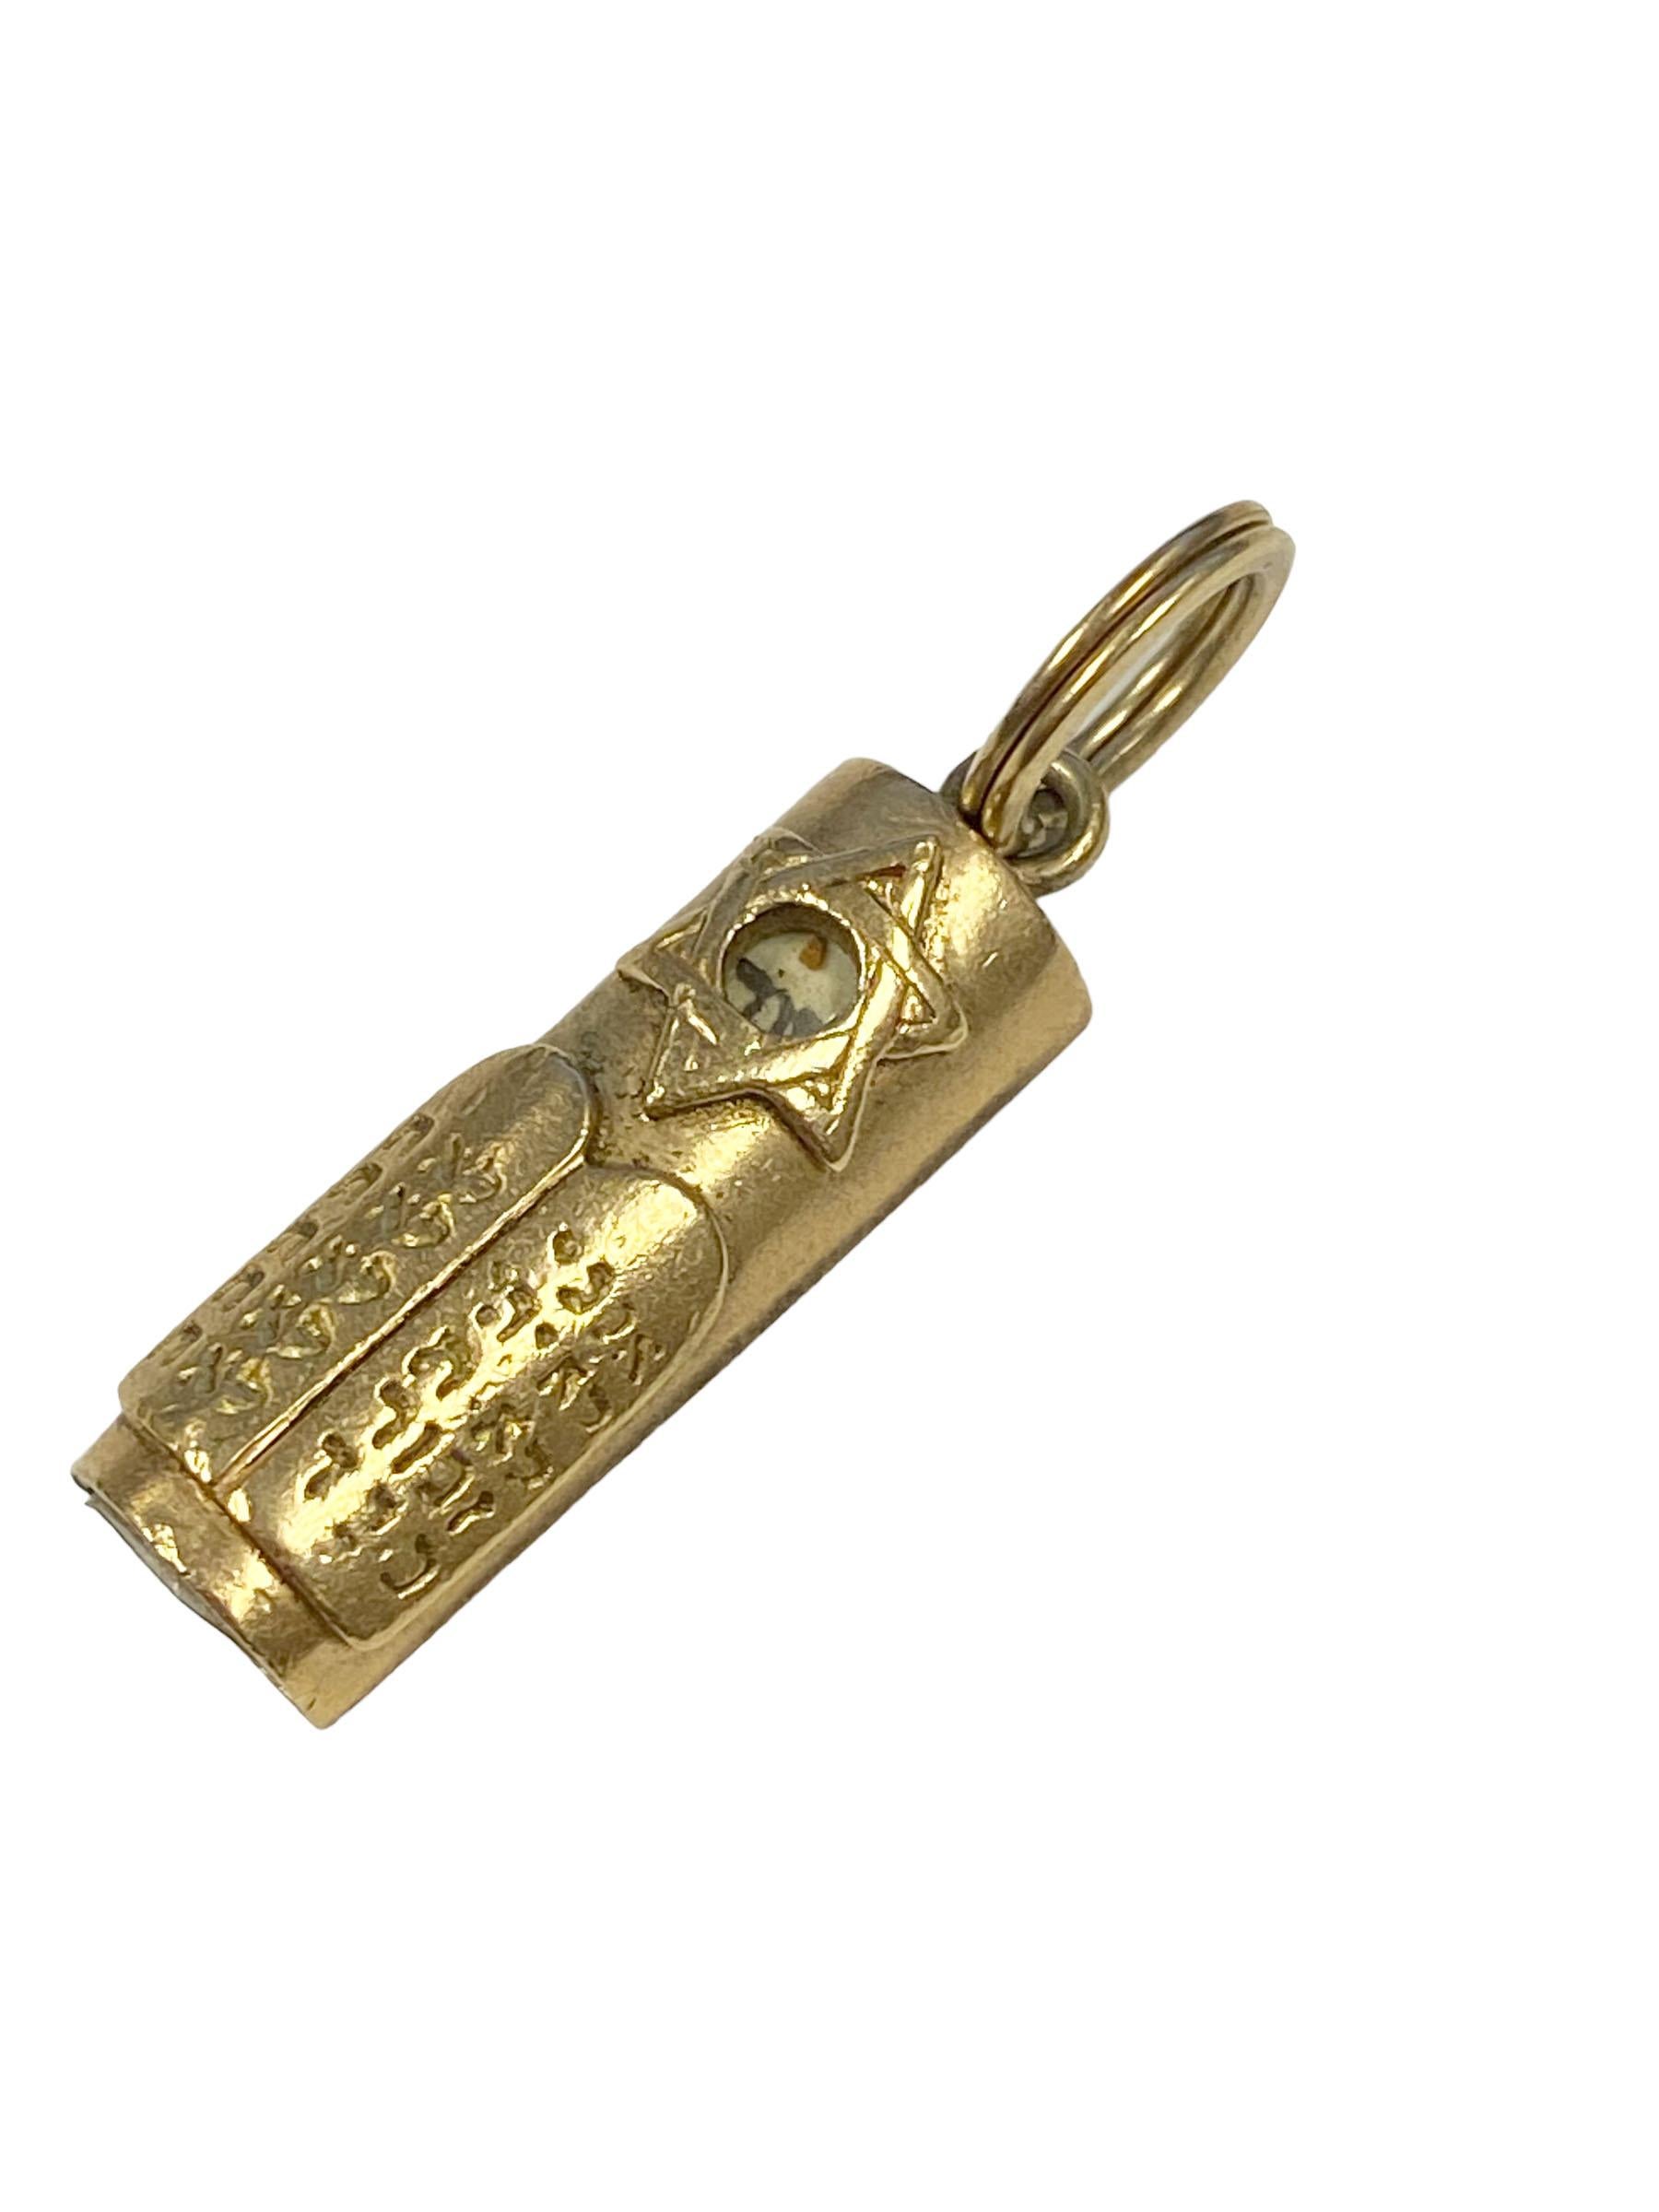 Jerry Lewis Owned and Worn Yellow Gold Mezuzah and Star of David 1